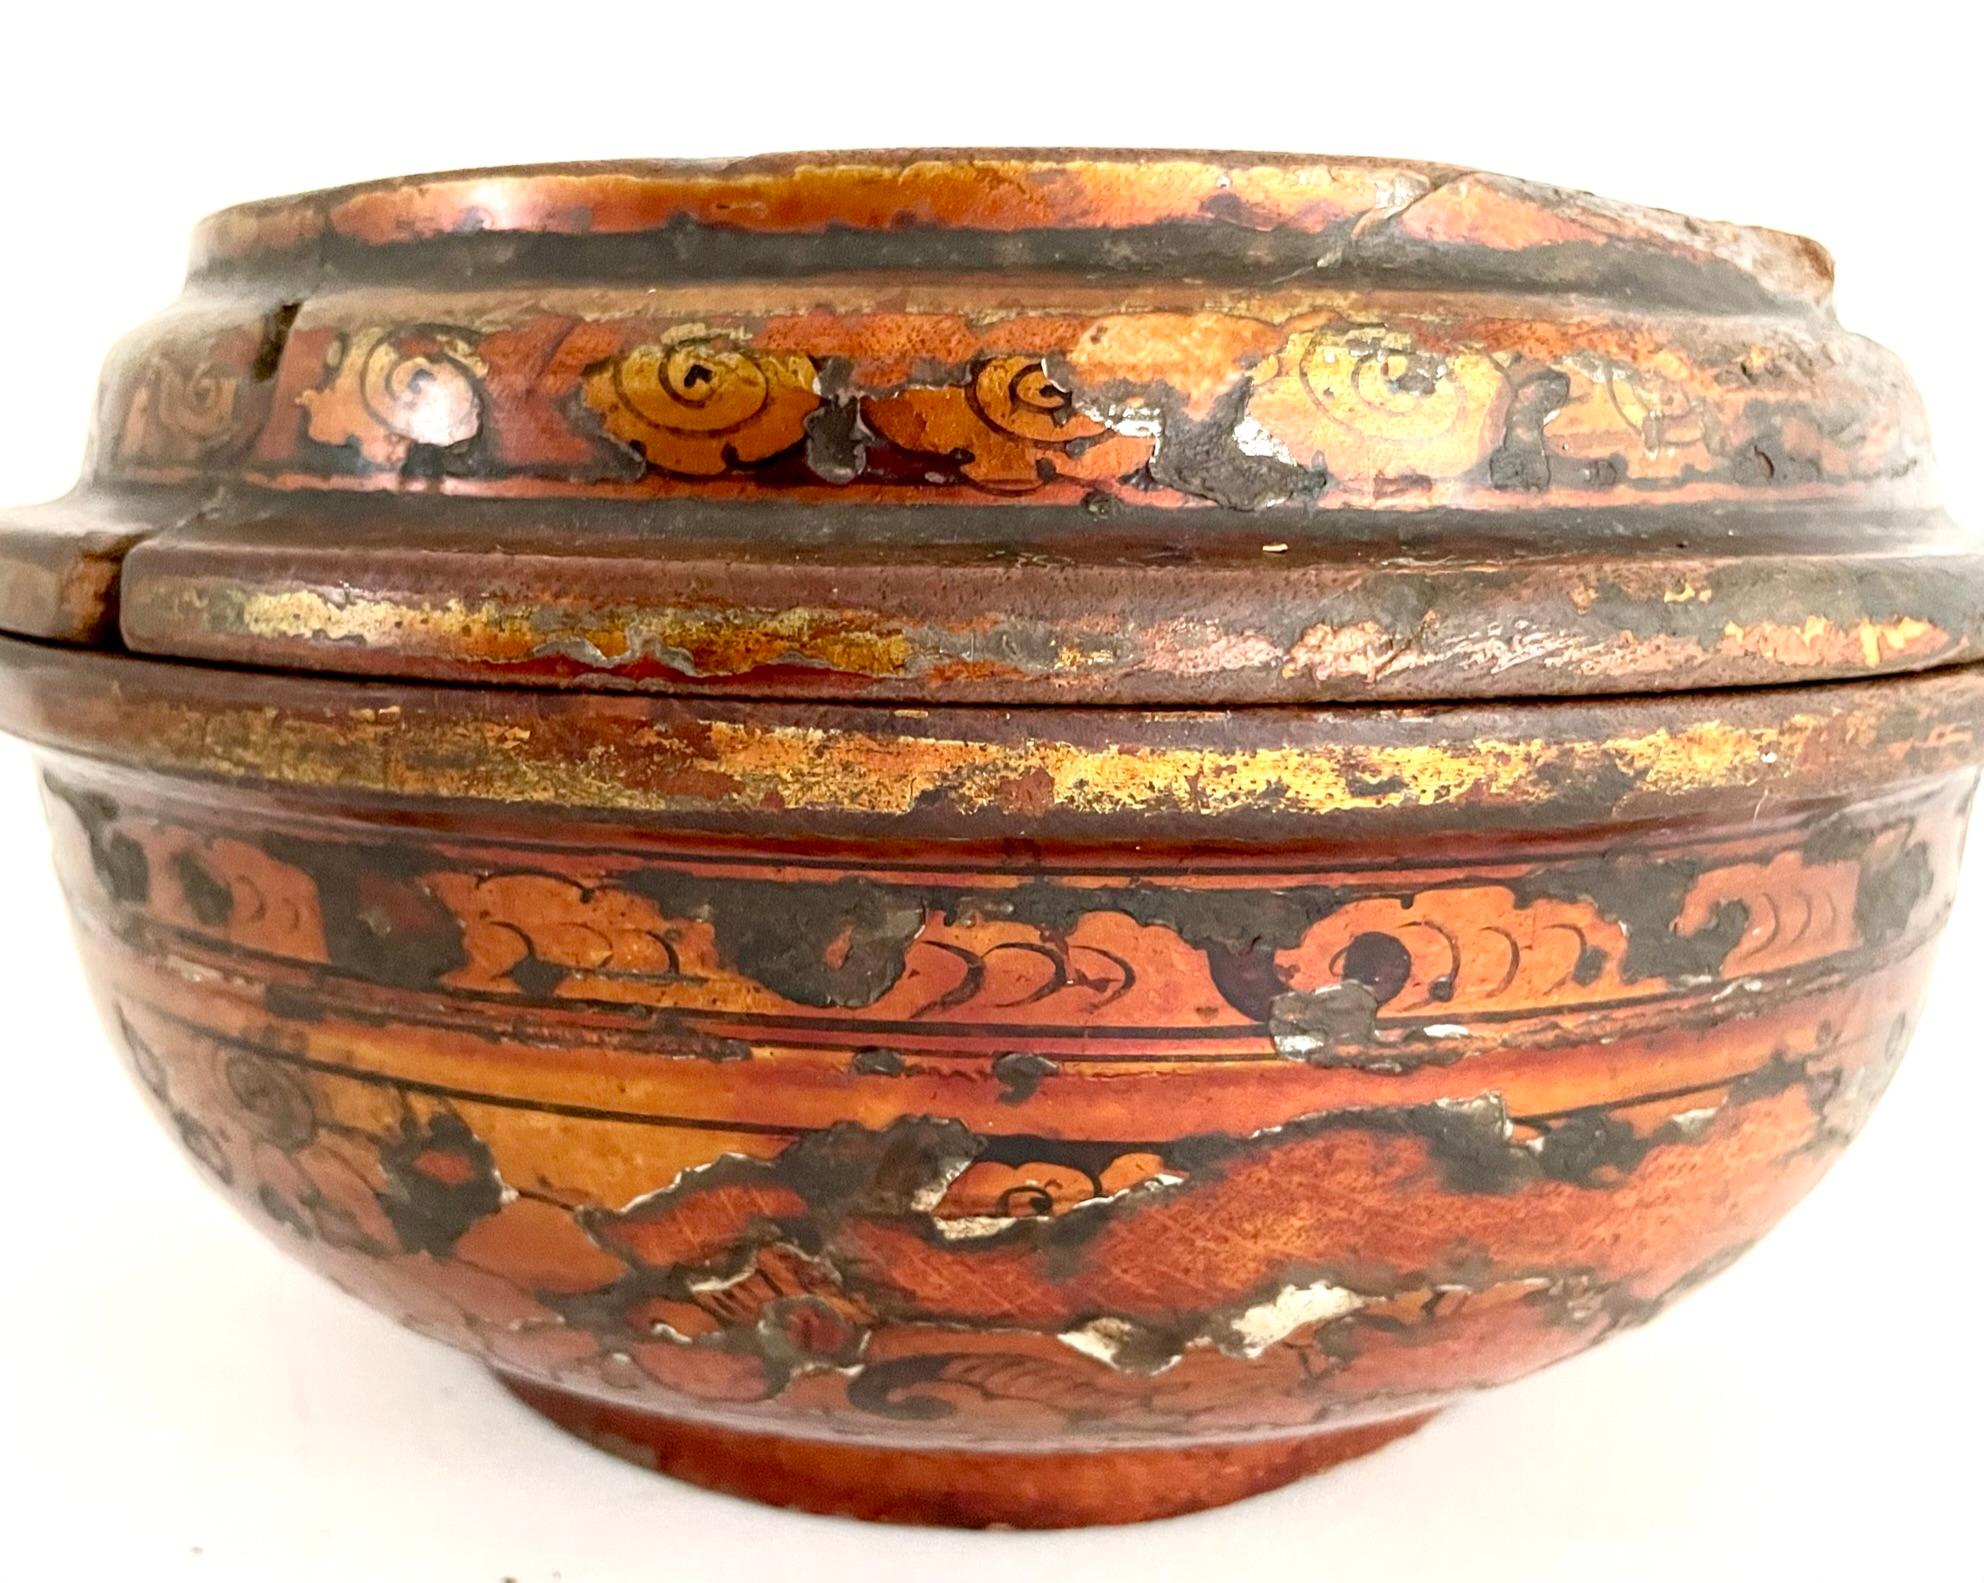 A beautiful late 19th century lacquer covered bowl that was once used for storing the famous Tibetan barley flour (Tsampa). This beautifully handcrafted wooden bowl has a gorgeous, layered patina. The bowl is hand painted with gold and black